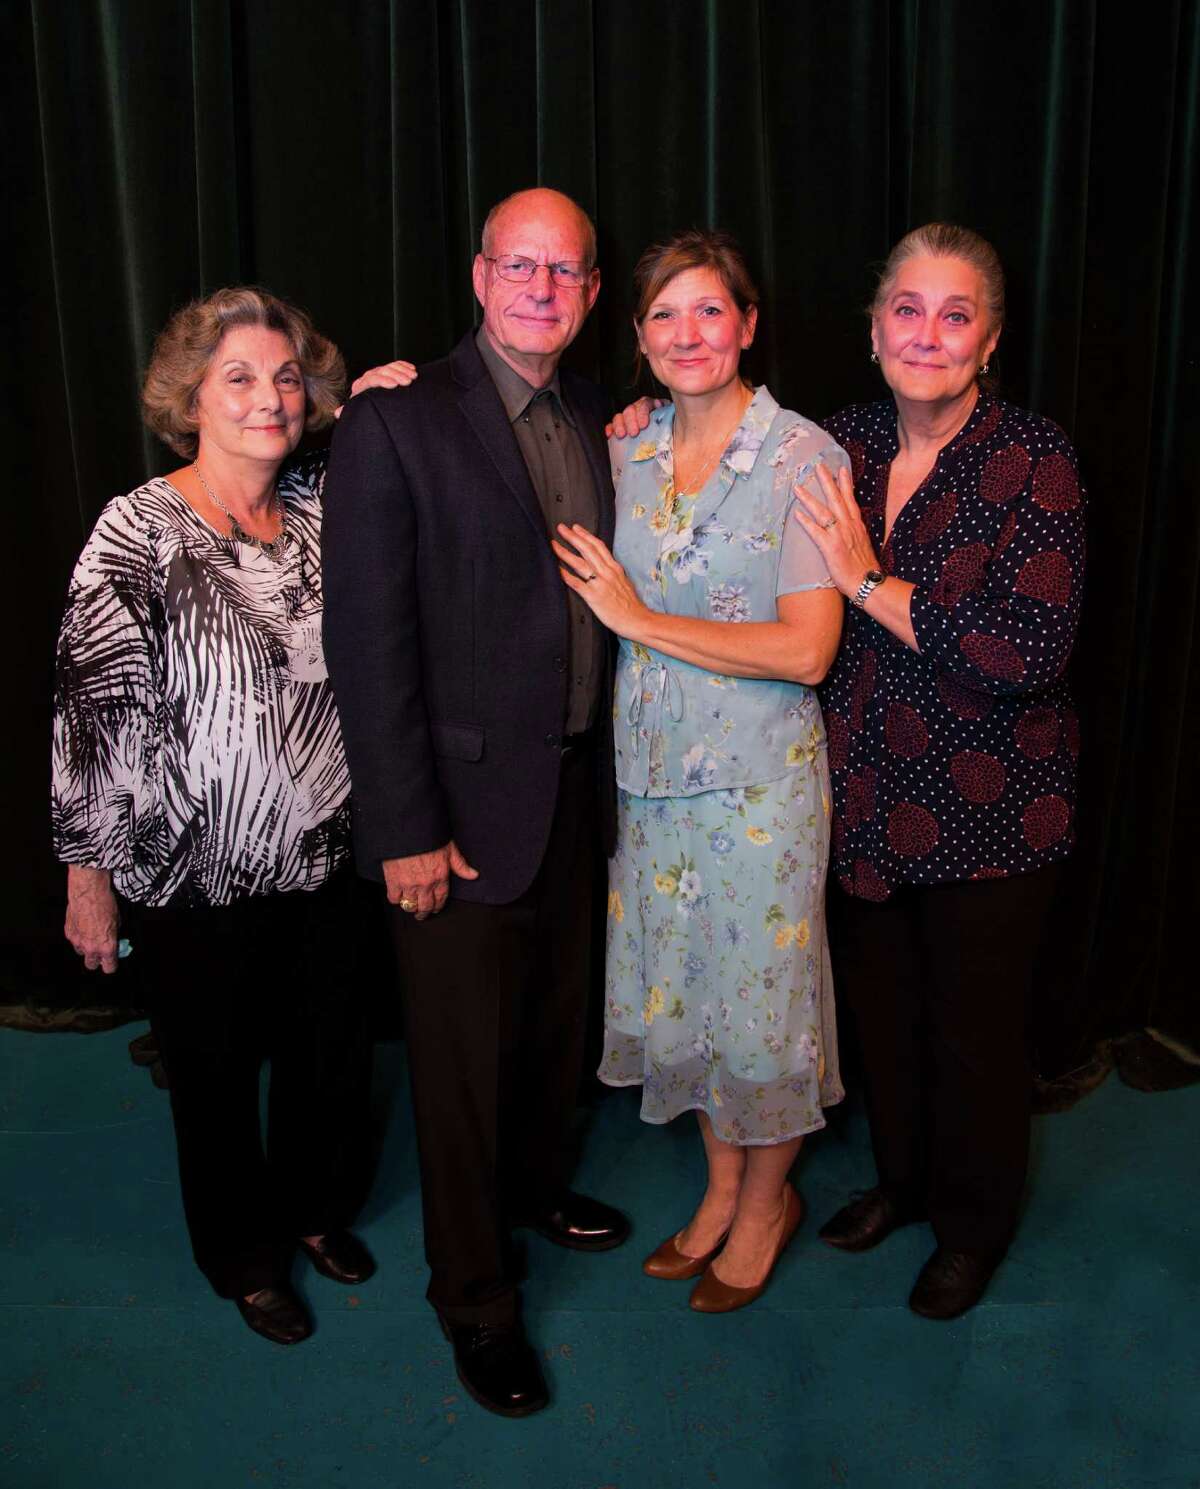 Pictured from left are the cast members in the Players Theatre Company's "The Cemetery Club," Terry Lynn Hale, Mark Wilson, Cindy Siple and Lisa Schofield. The show opened Jan. 27 and continues through Feb. 12 at the Owen Theatre in downtown Conroe.